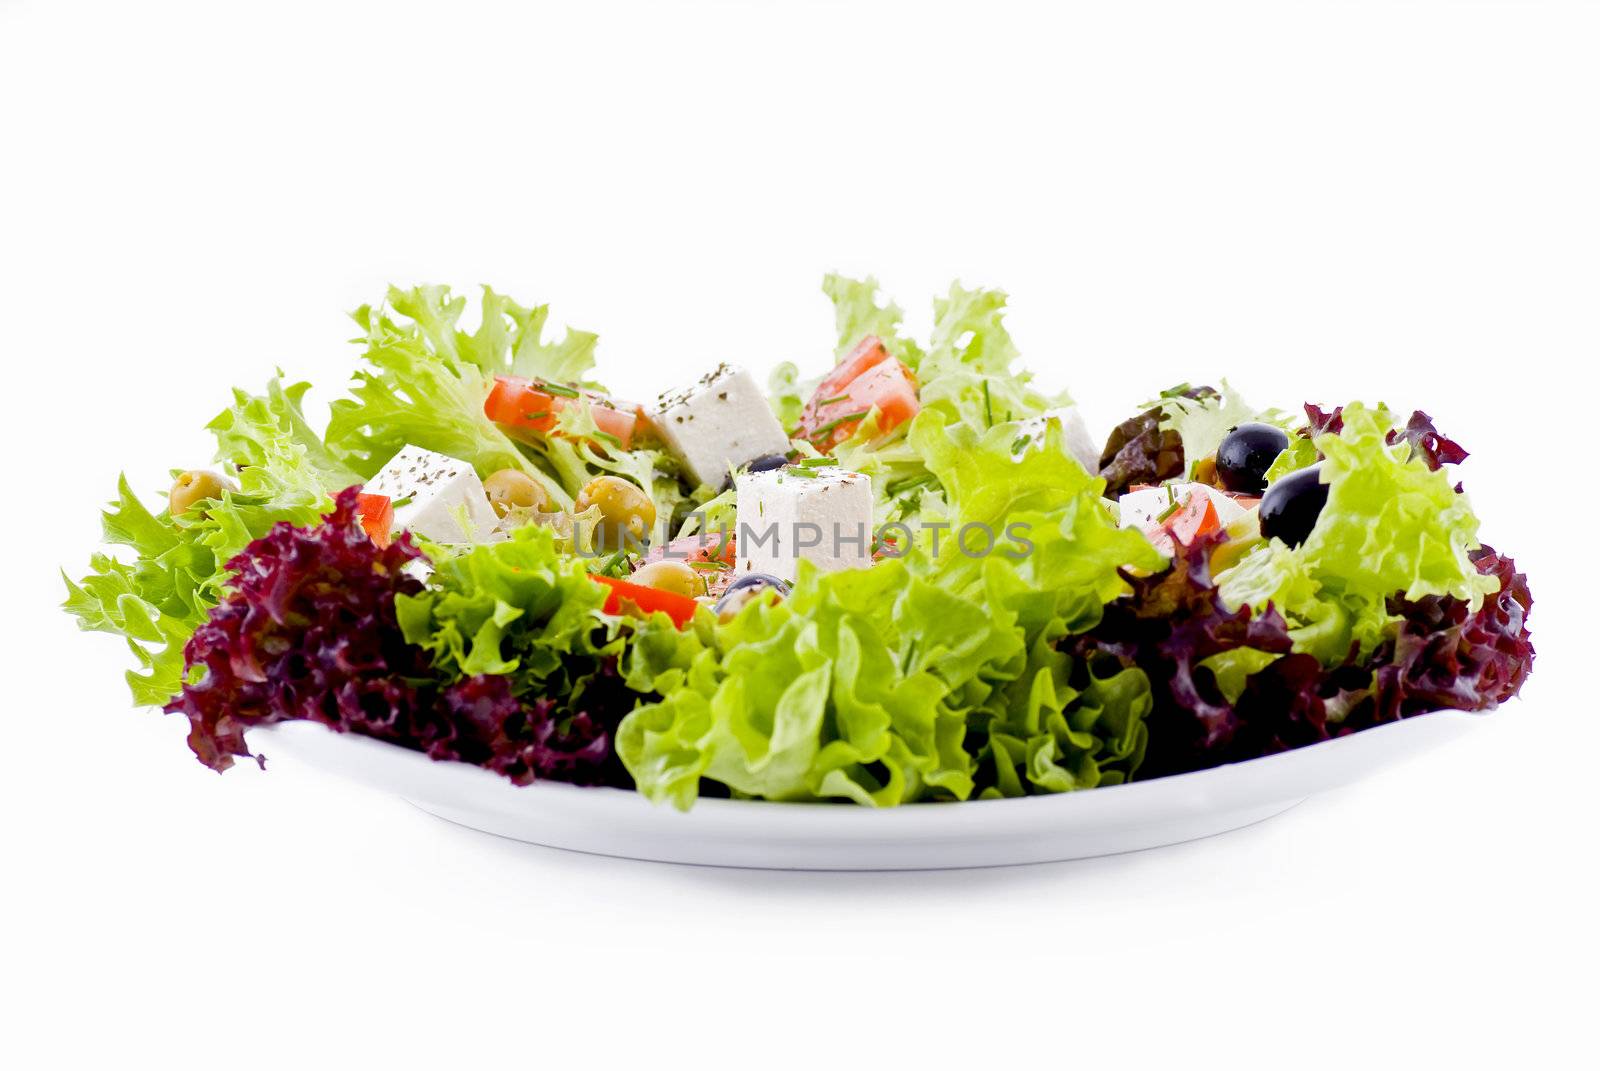 Plate of fresh vegetables - salad, olives, tomato, feta and herbs